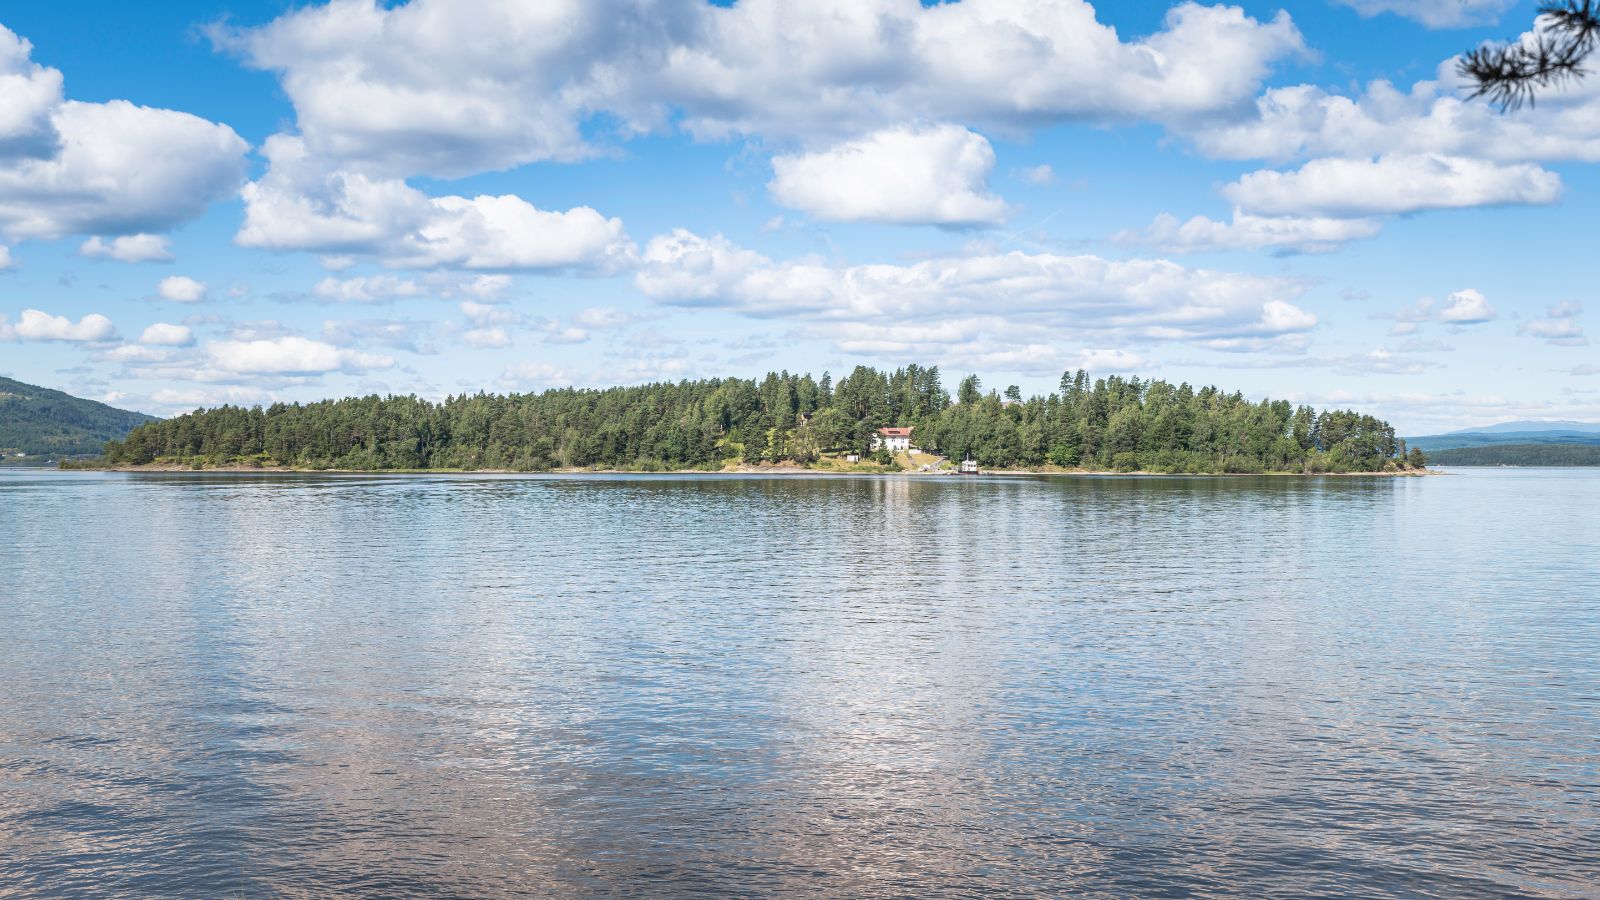 A picture of Utoya island